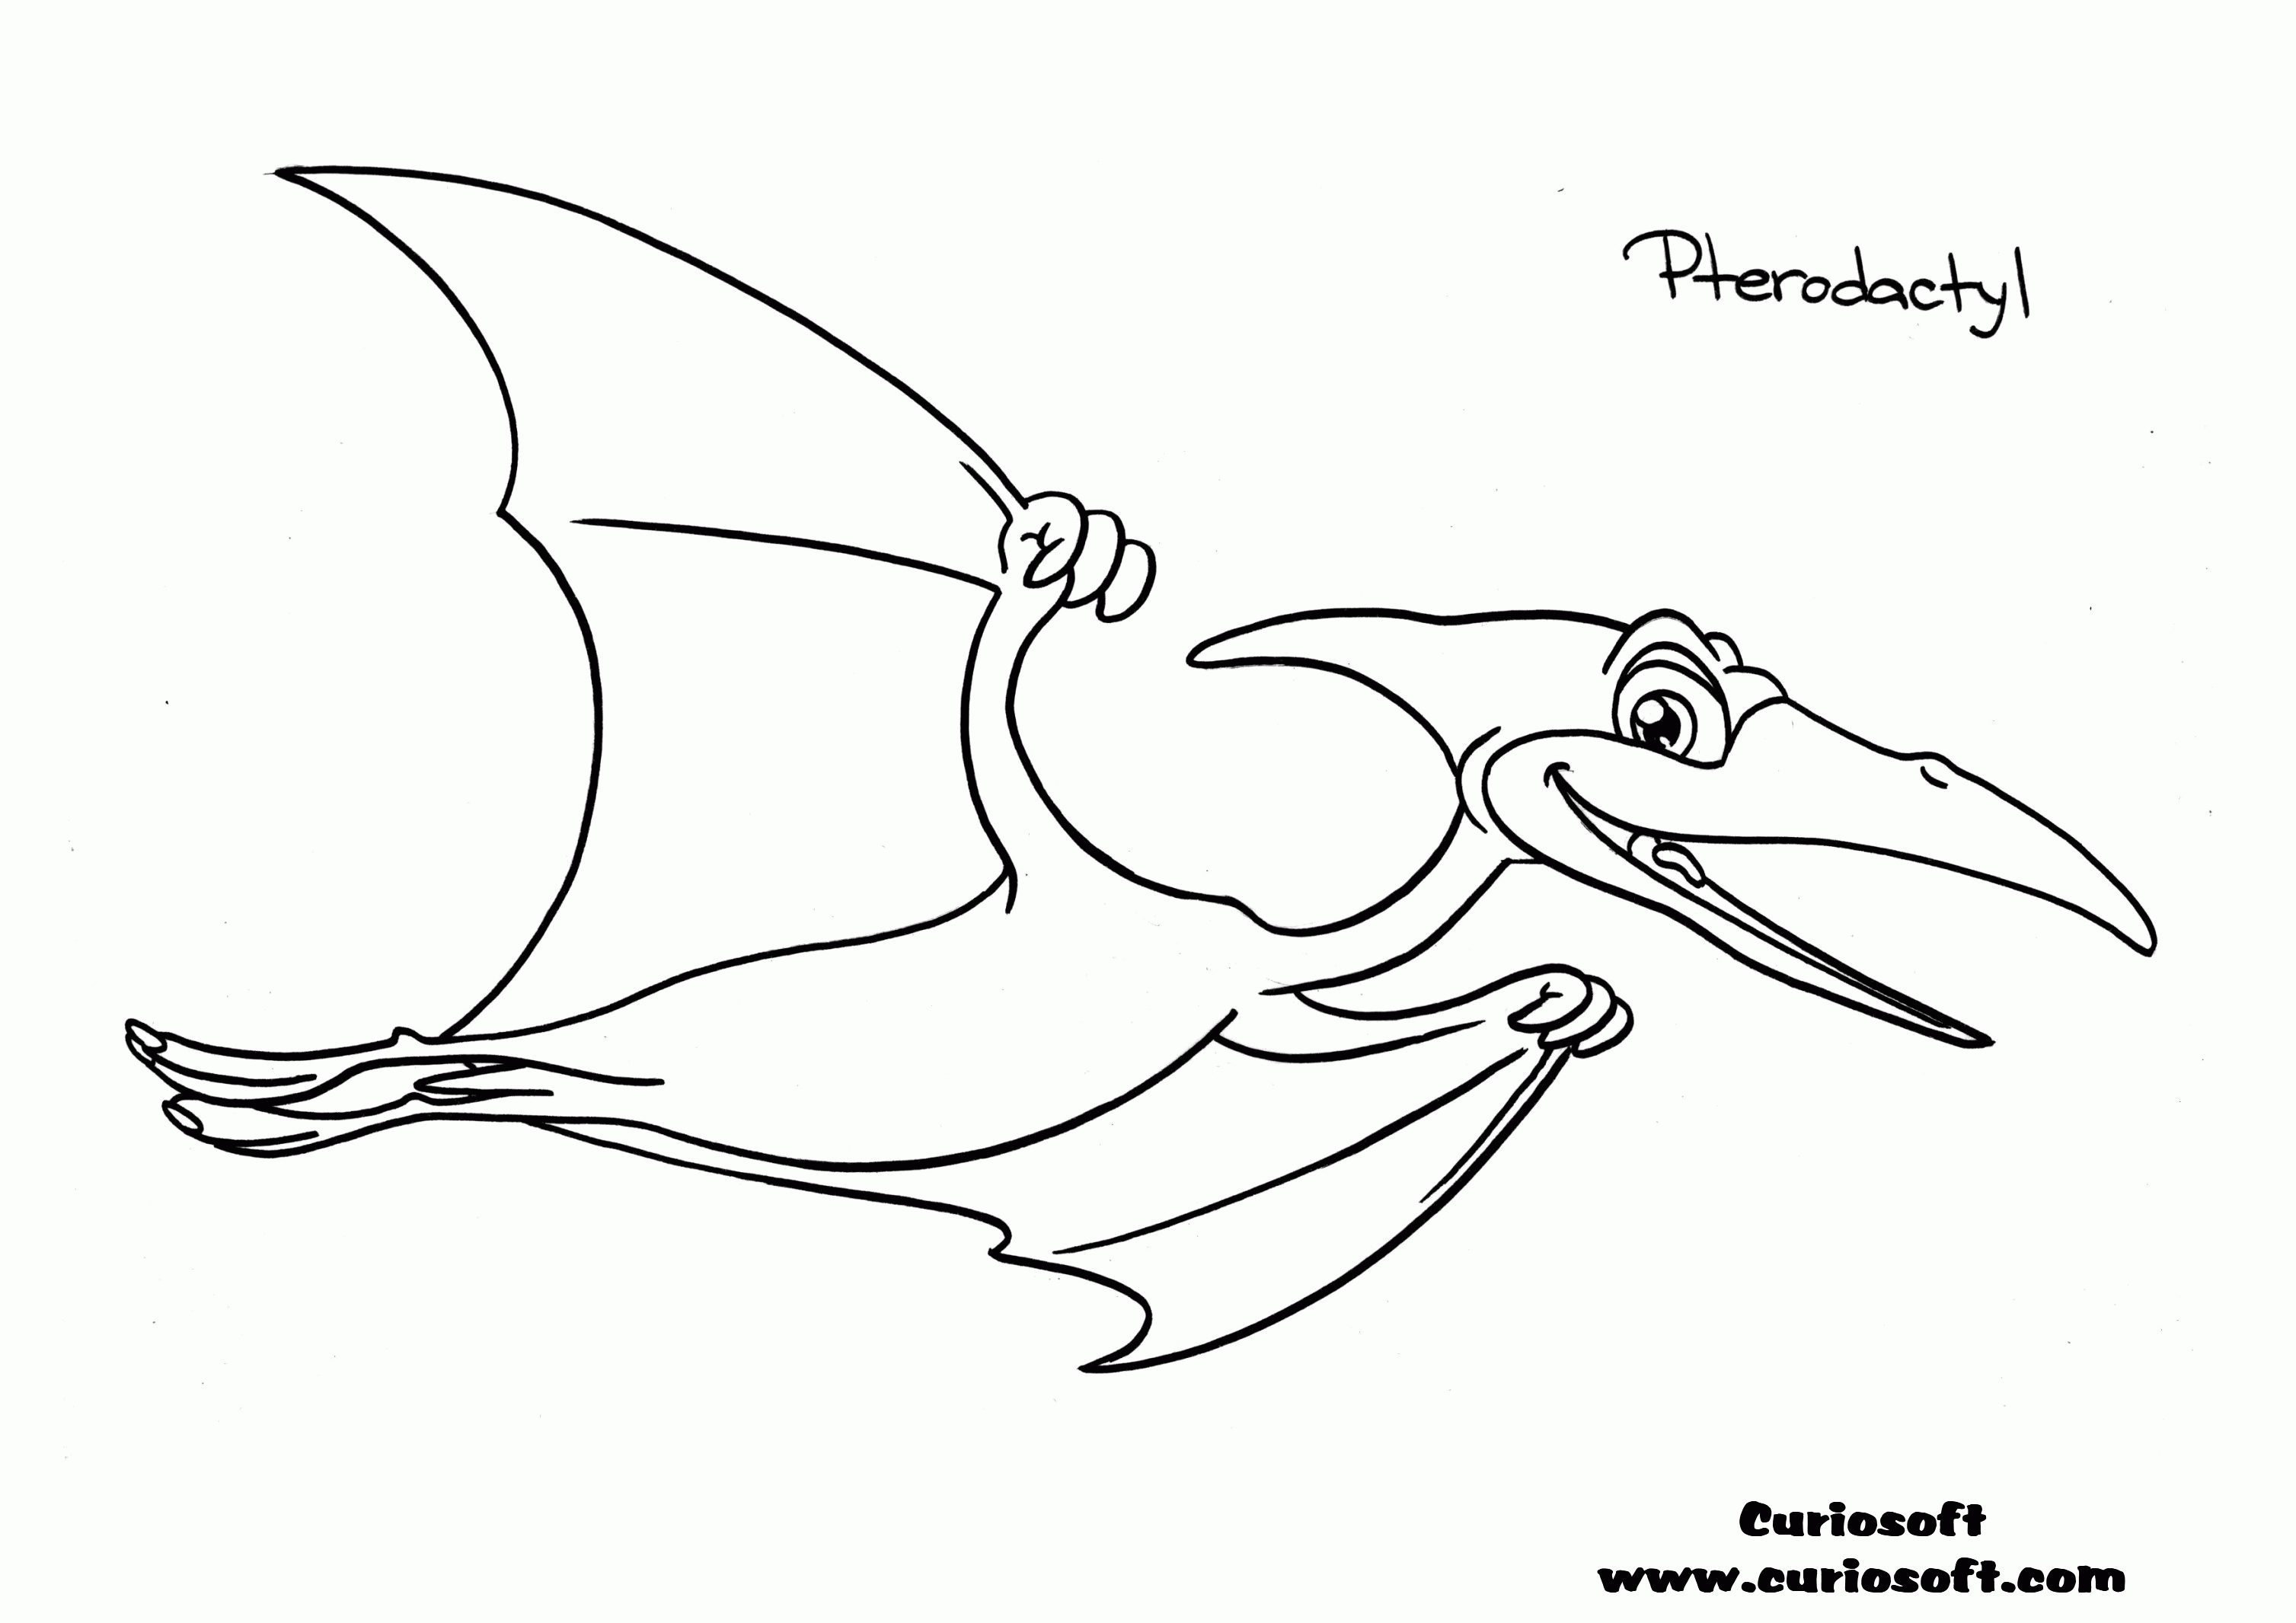 Download Pterodactyl Coloring Pages | Dinosaurs Pictures And Facts ...